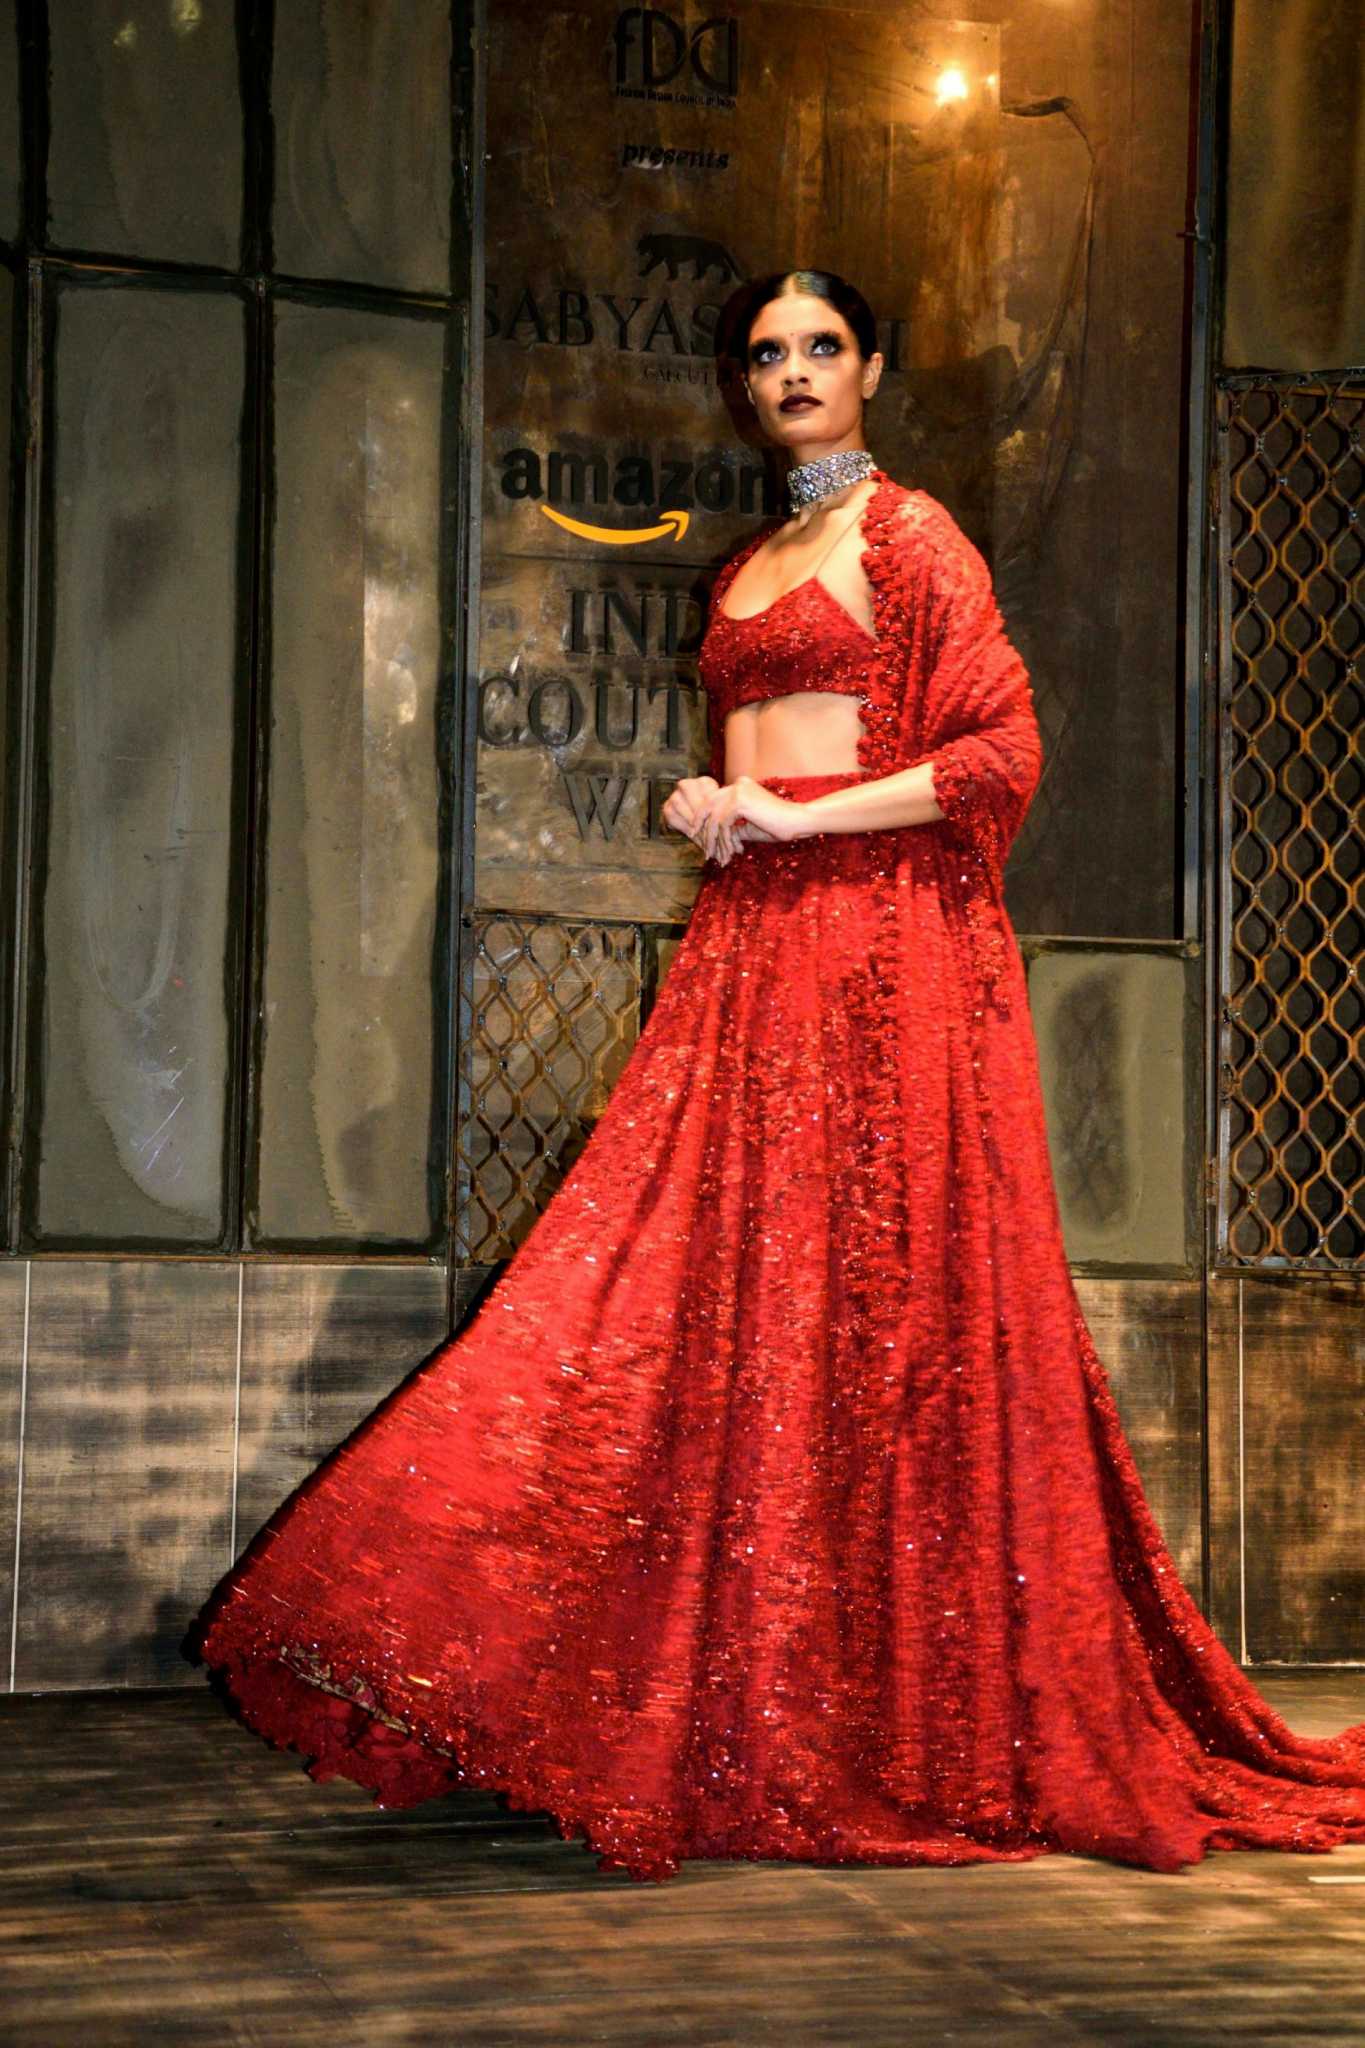 Jaw-dropping dresses from India Couture Week 2015 - Houston Chronicle1365 x 2048